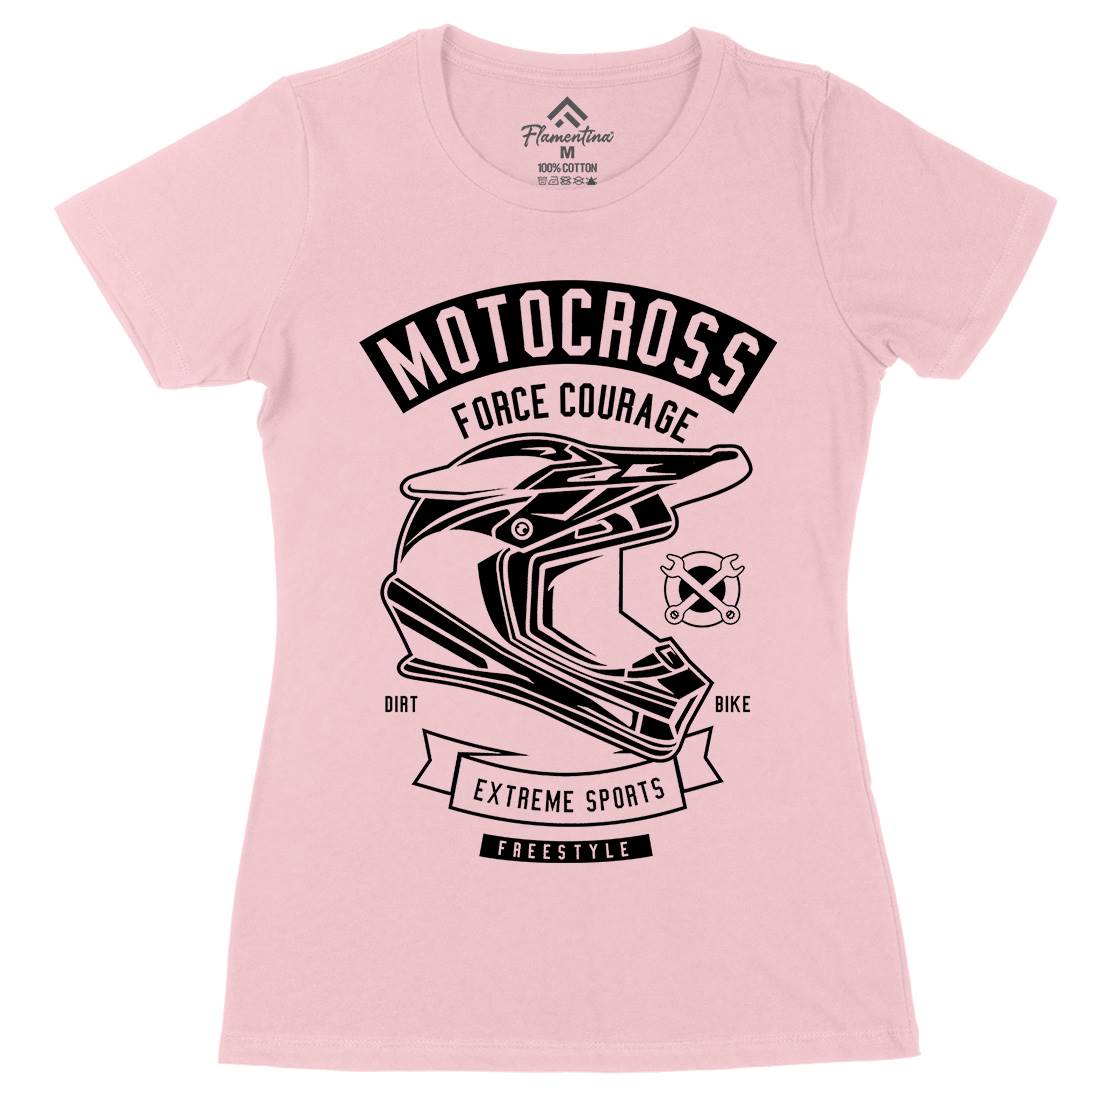 Motocross Force Courage Womens Organic Crew Neck T-Shirt Motorcycles B576